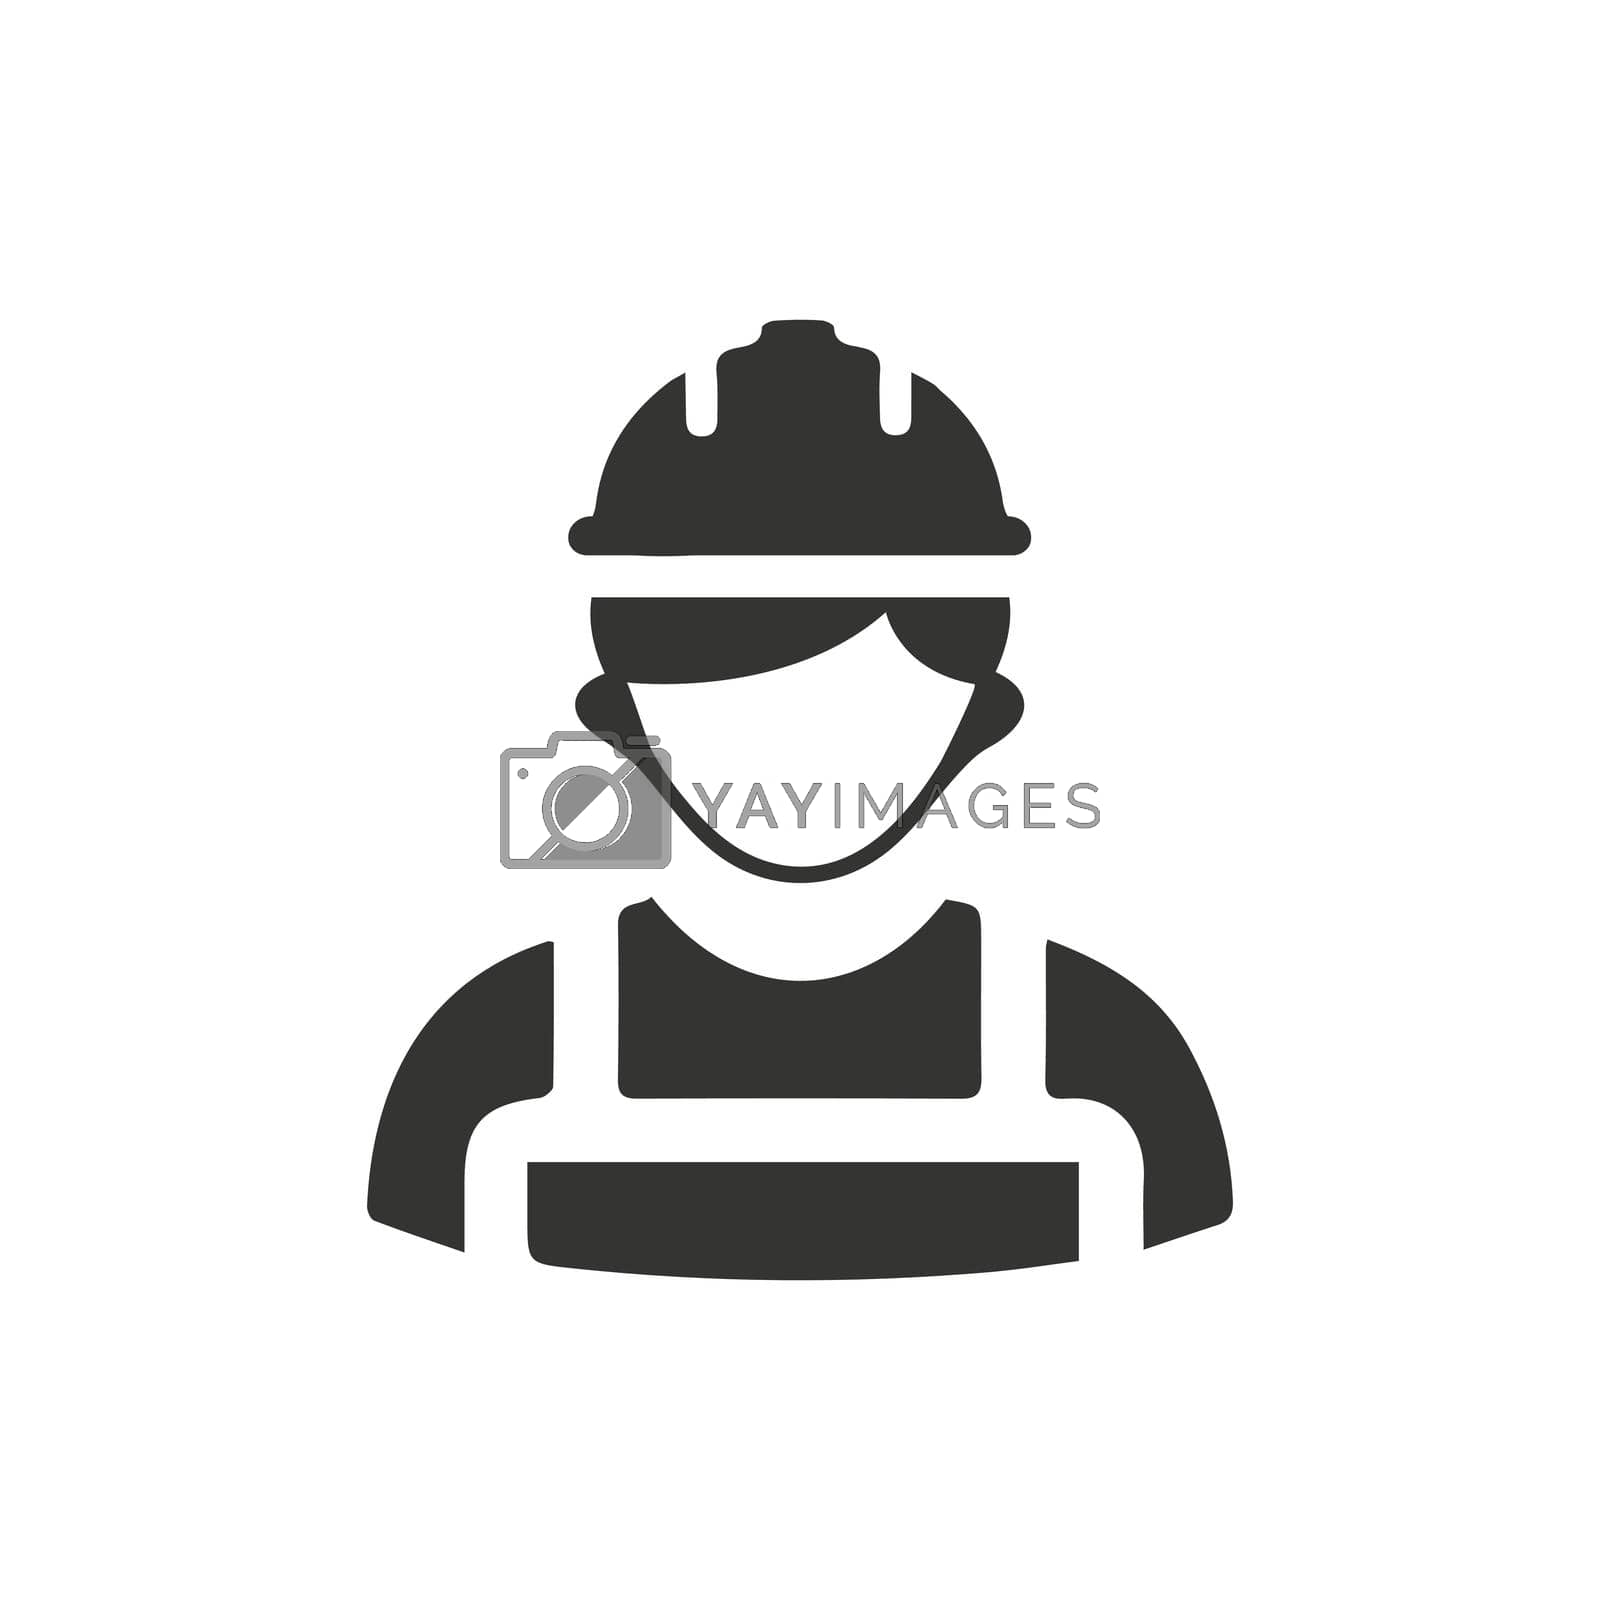 Royalty free image of Contractor Icon by delwar018